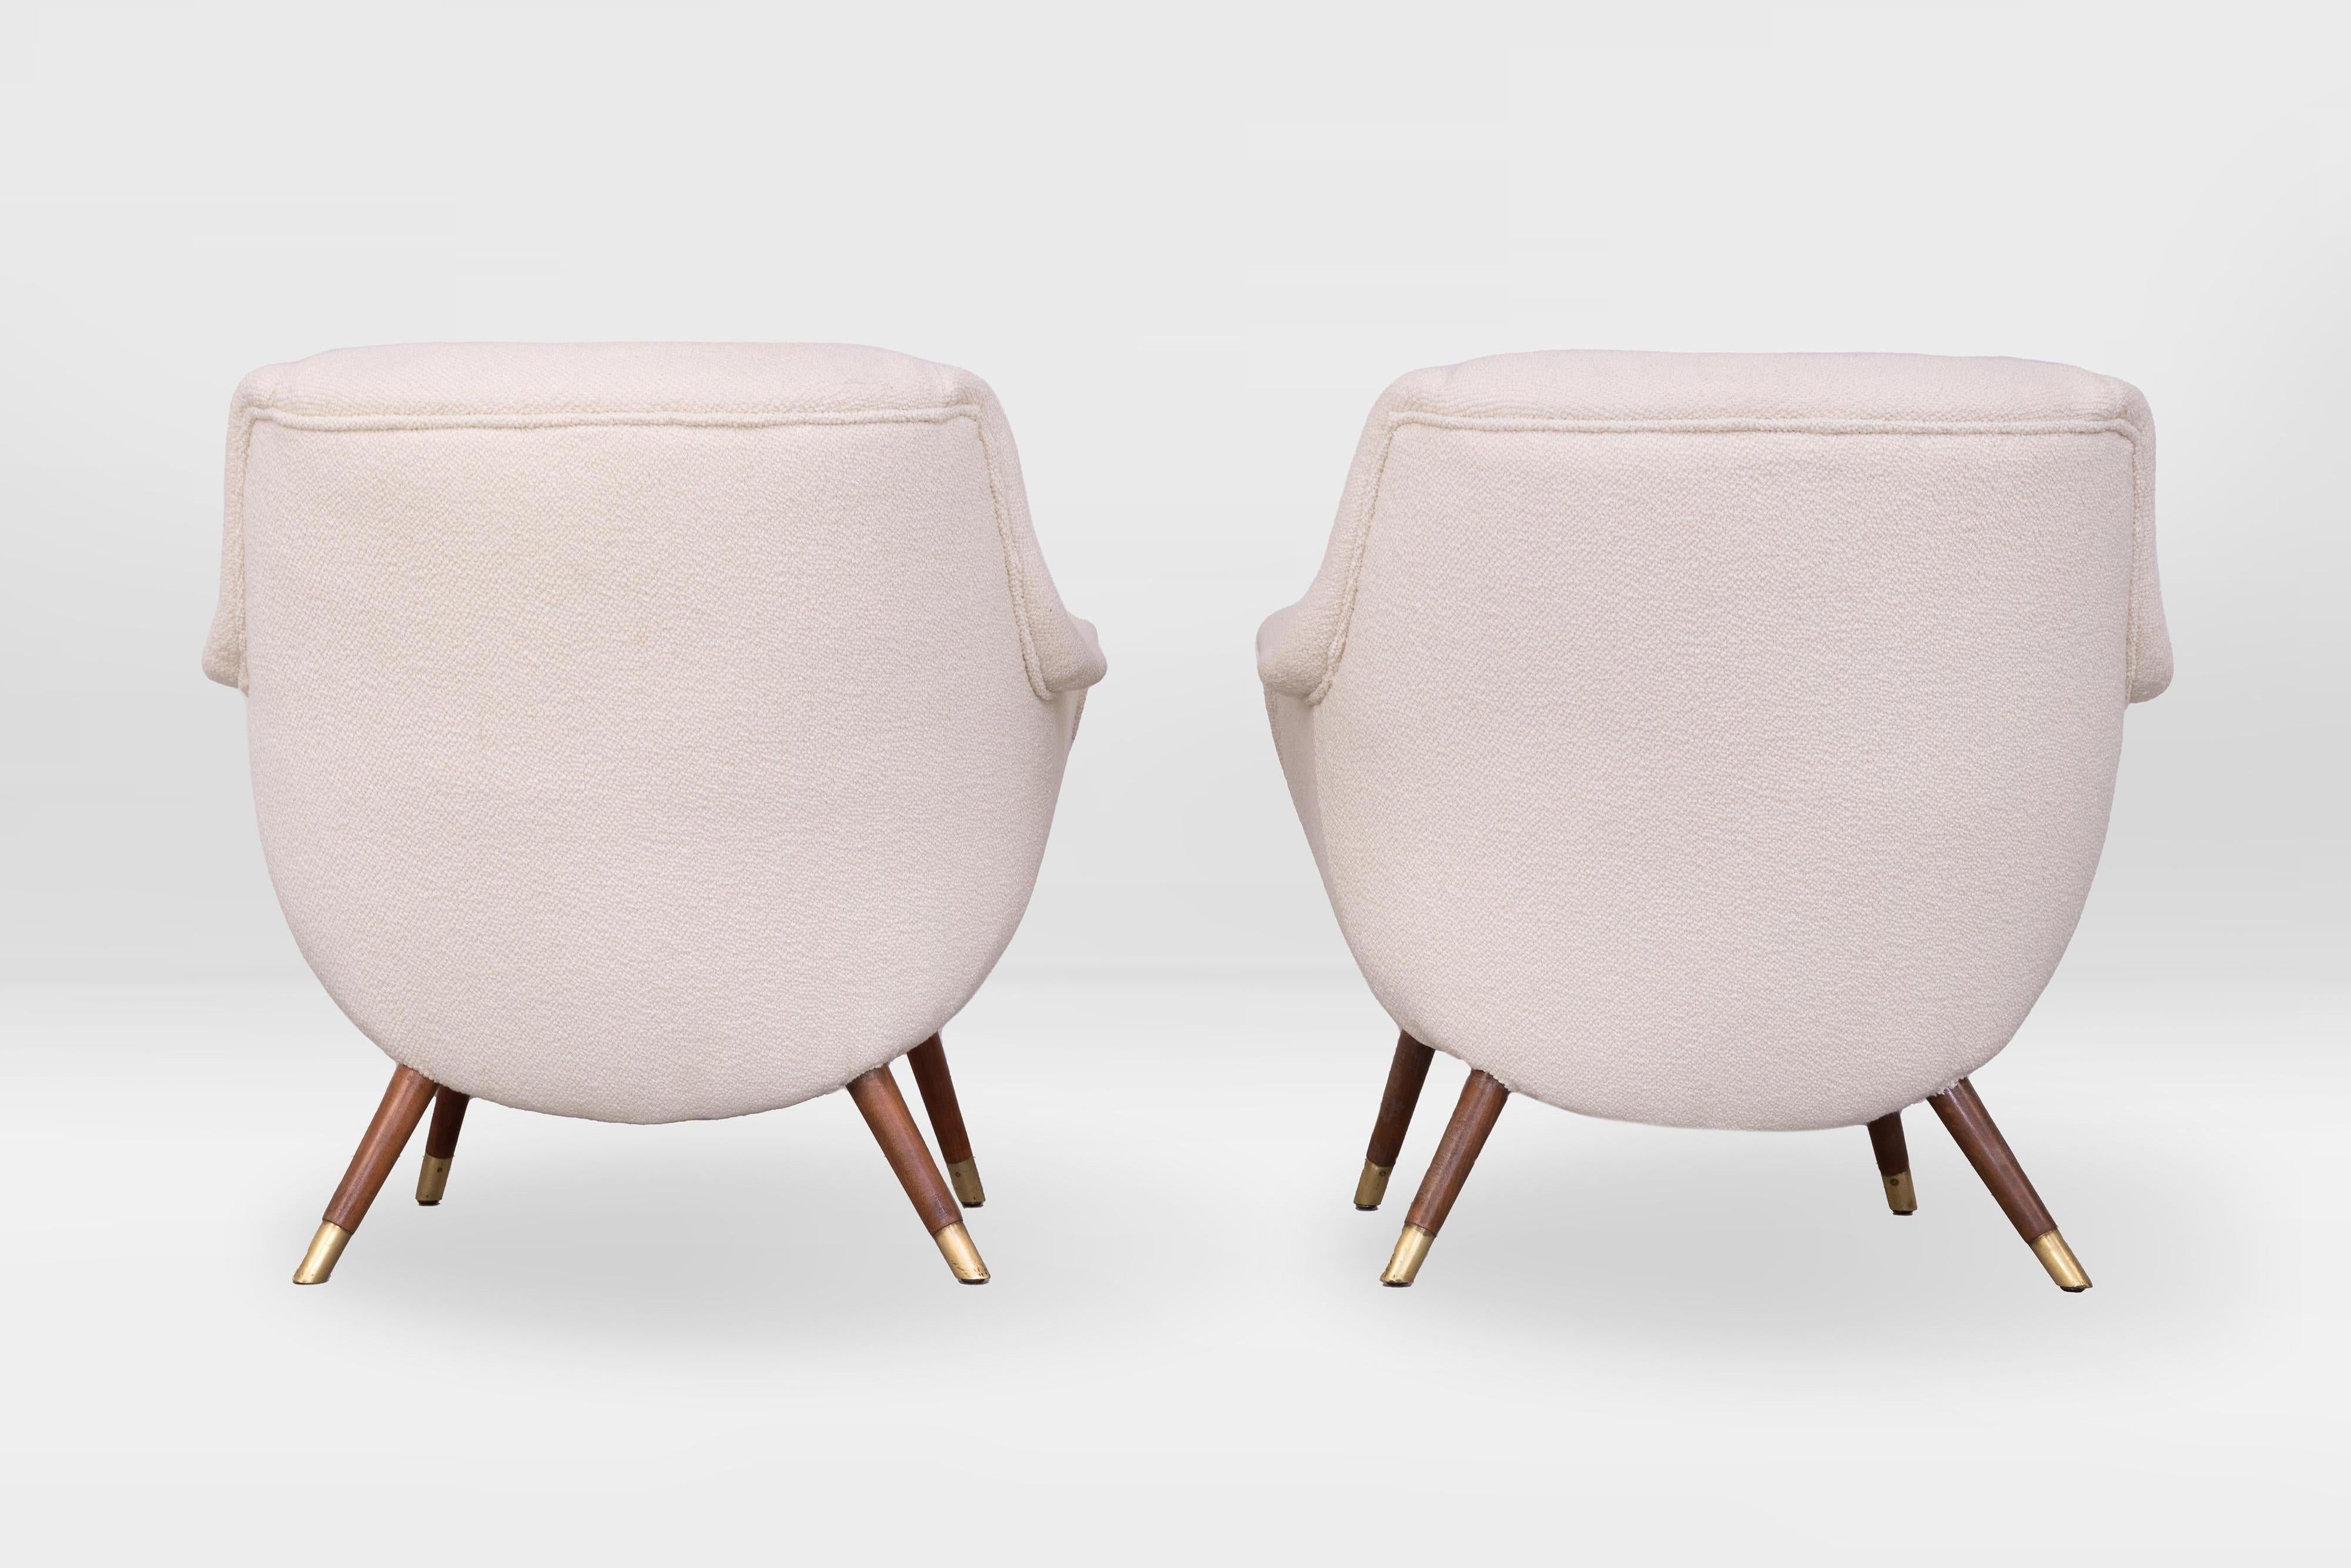 Pair of Mid-Century Egg Shaped Armchairs, Belgium 1950s, Wool Boucle' by Larsen For Sale 5